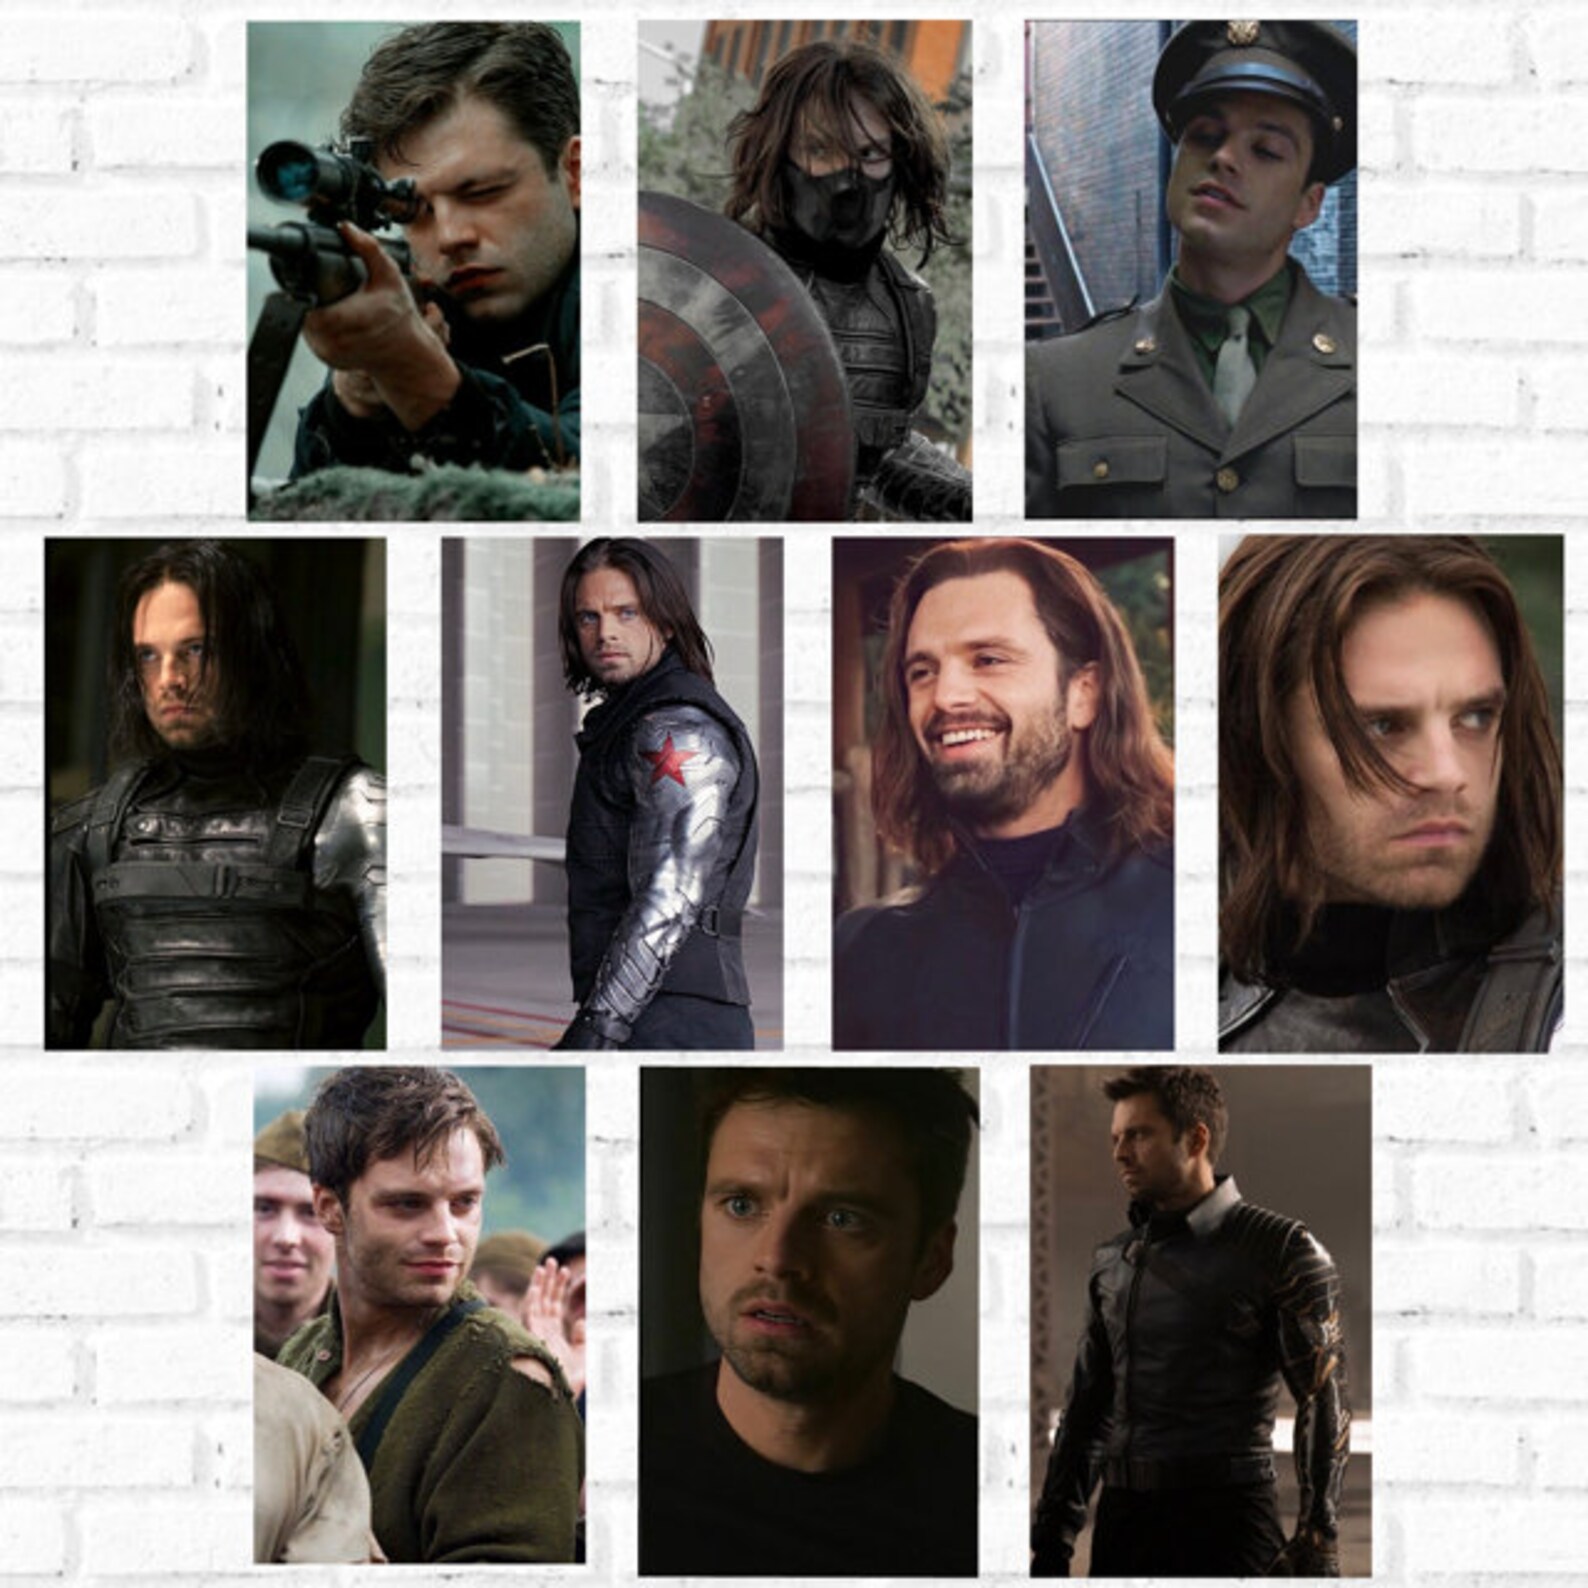 Bucky Barnes Photo Prints Pack of 10 Collage 6x4 inches | Etsy